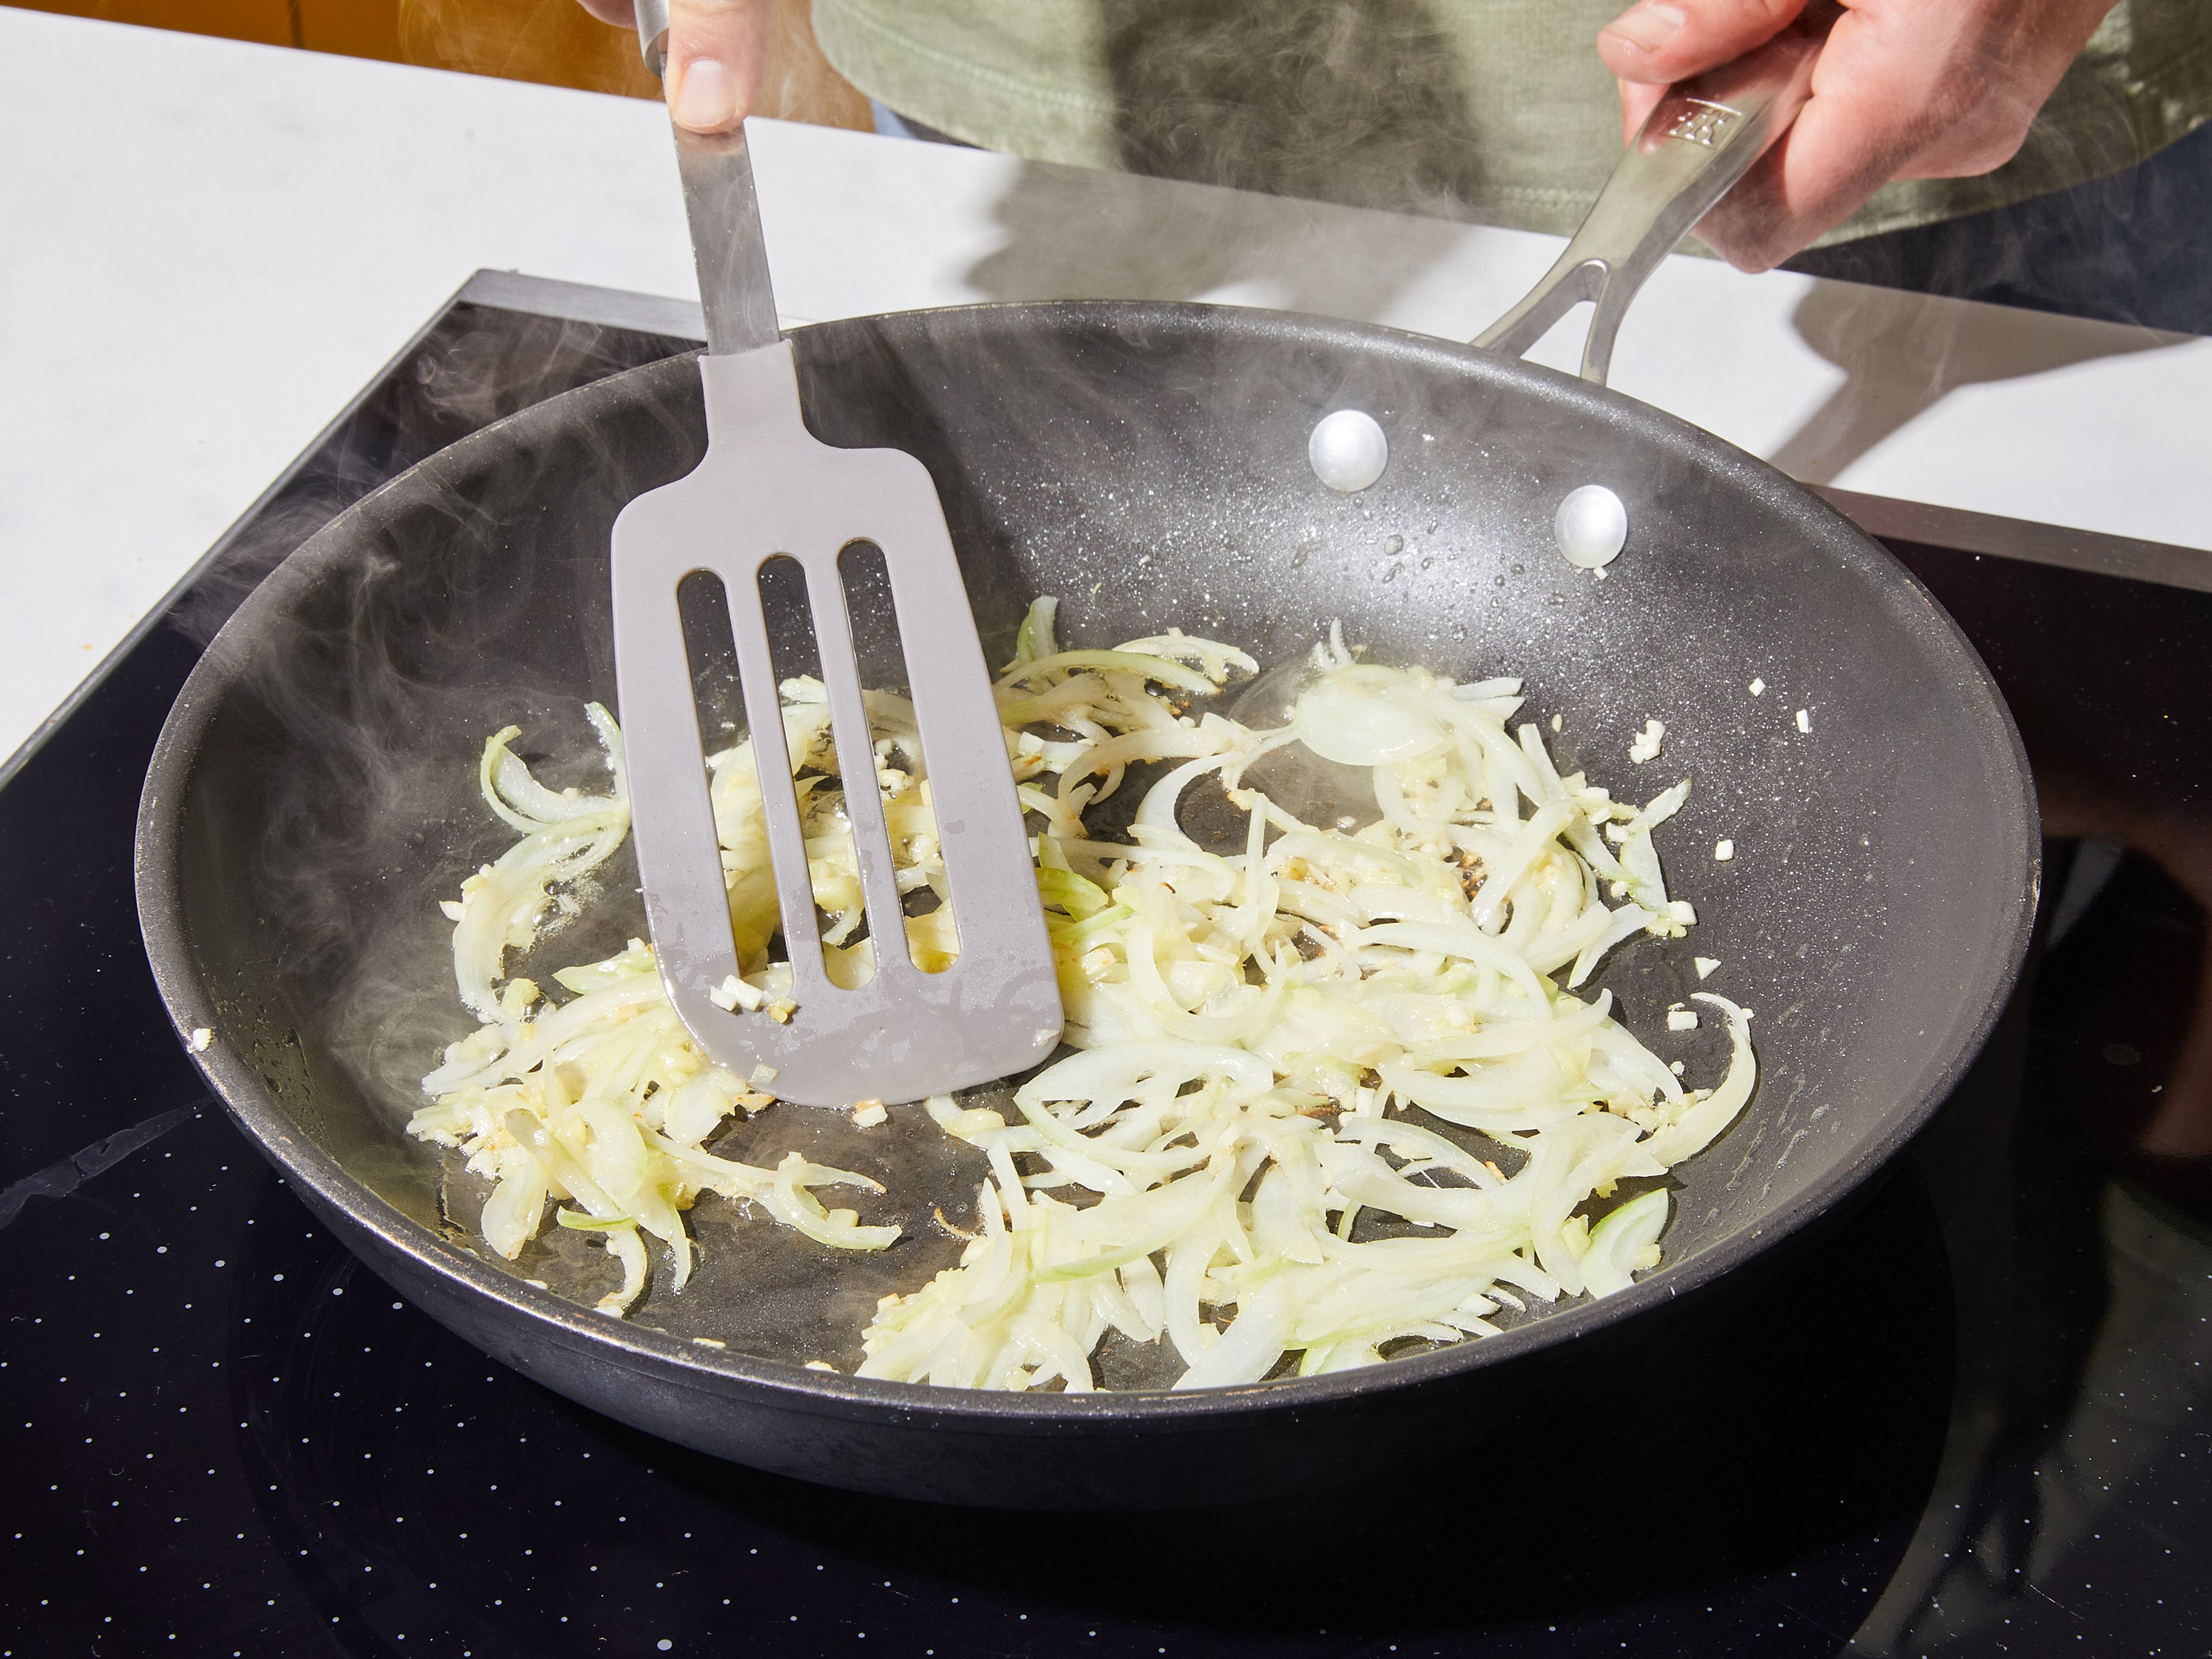 Add butter to a large, non-stick frying pan, set over medium-low heat, and let melt. Once melted, add onion, garlic, and ginger and fry gently, approx. 5 min., until soft.